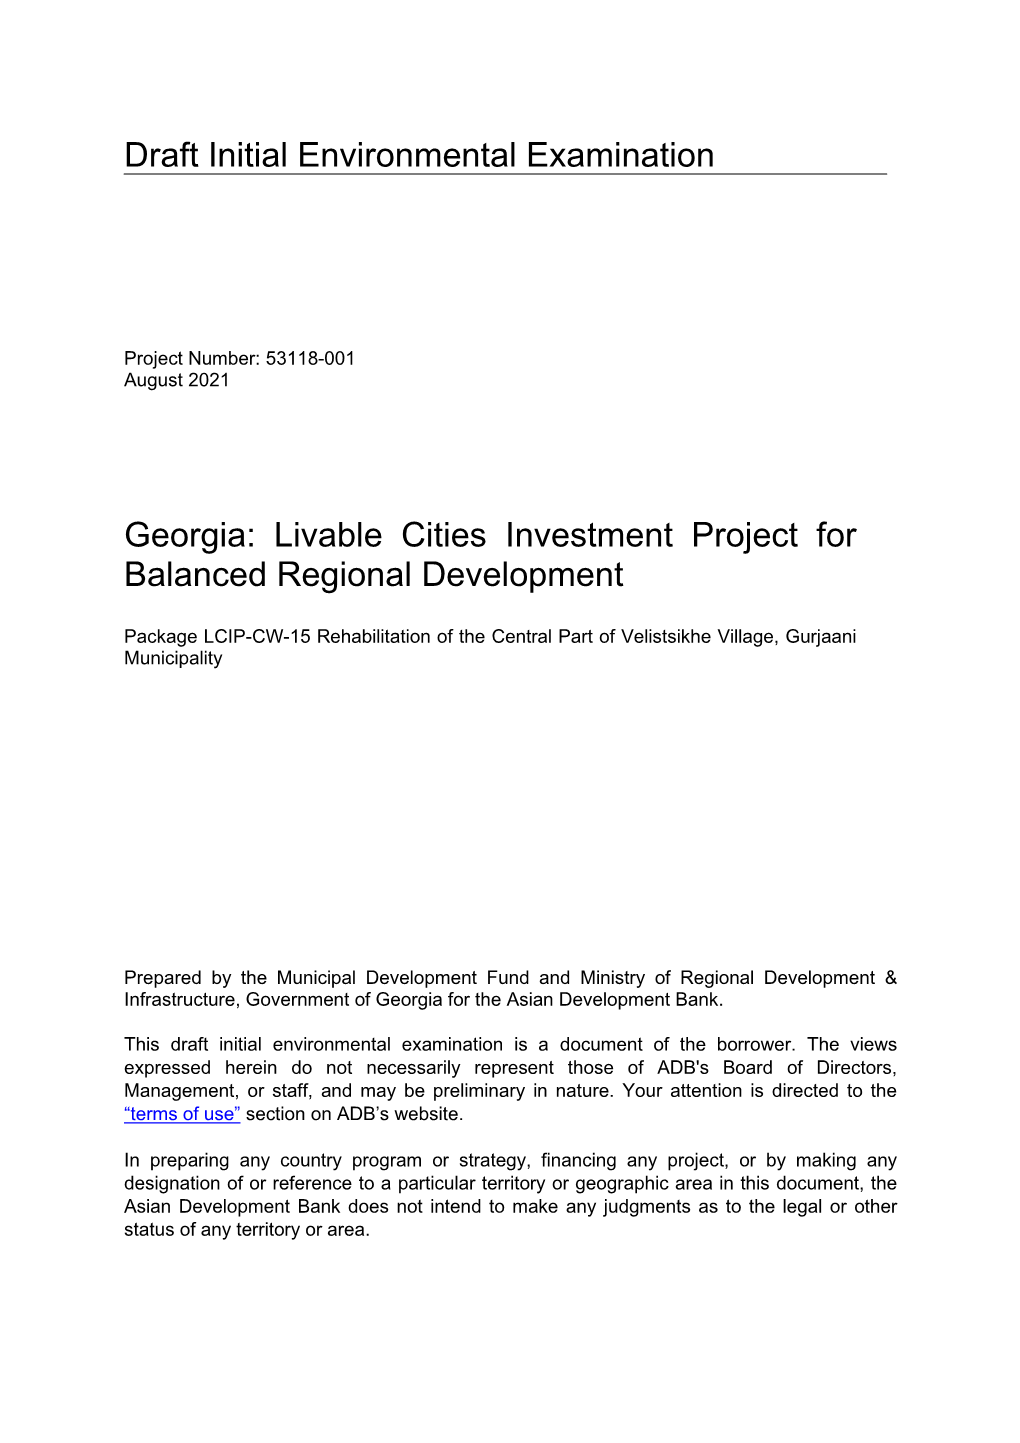 53118-001: Livable Cities Investment Project for Balanced Regional